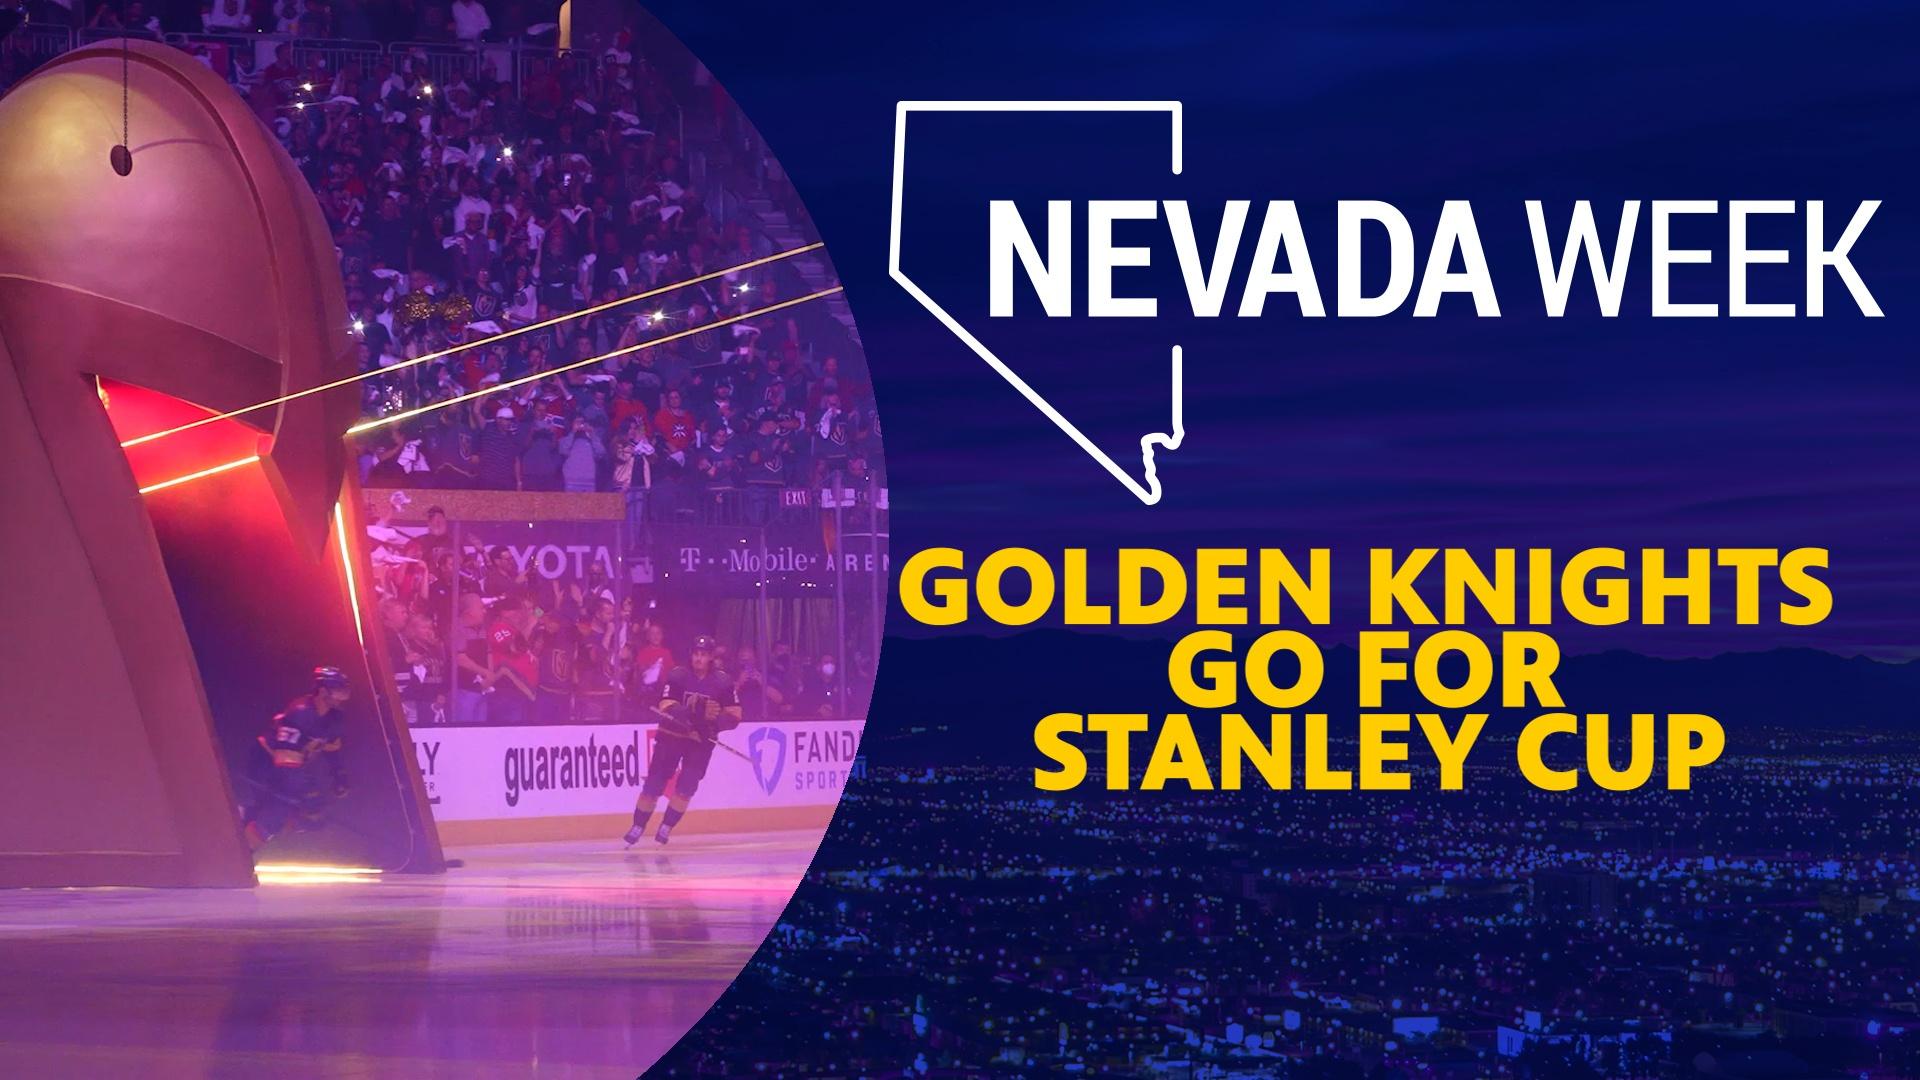 Golden Knights Go for Stanley Cup